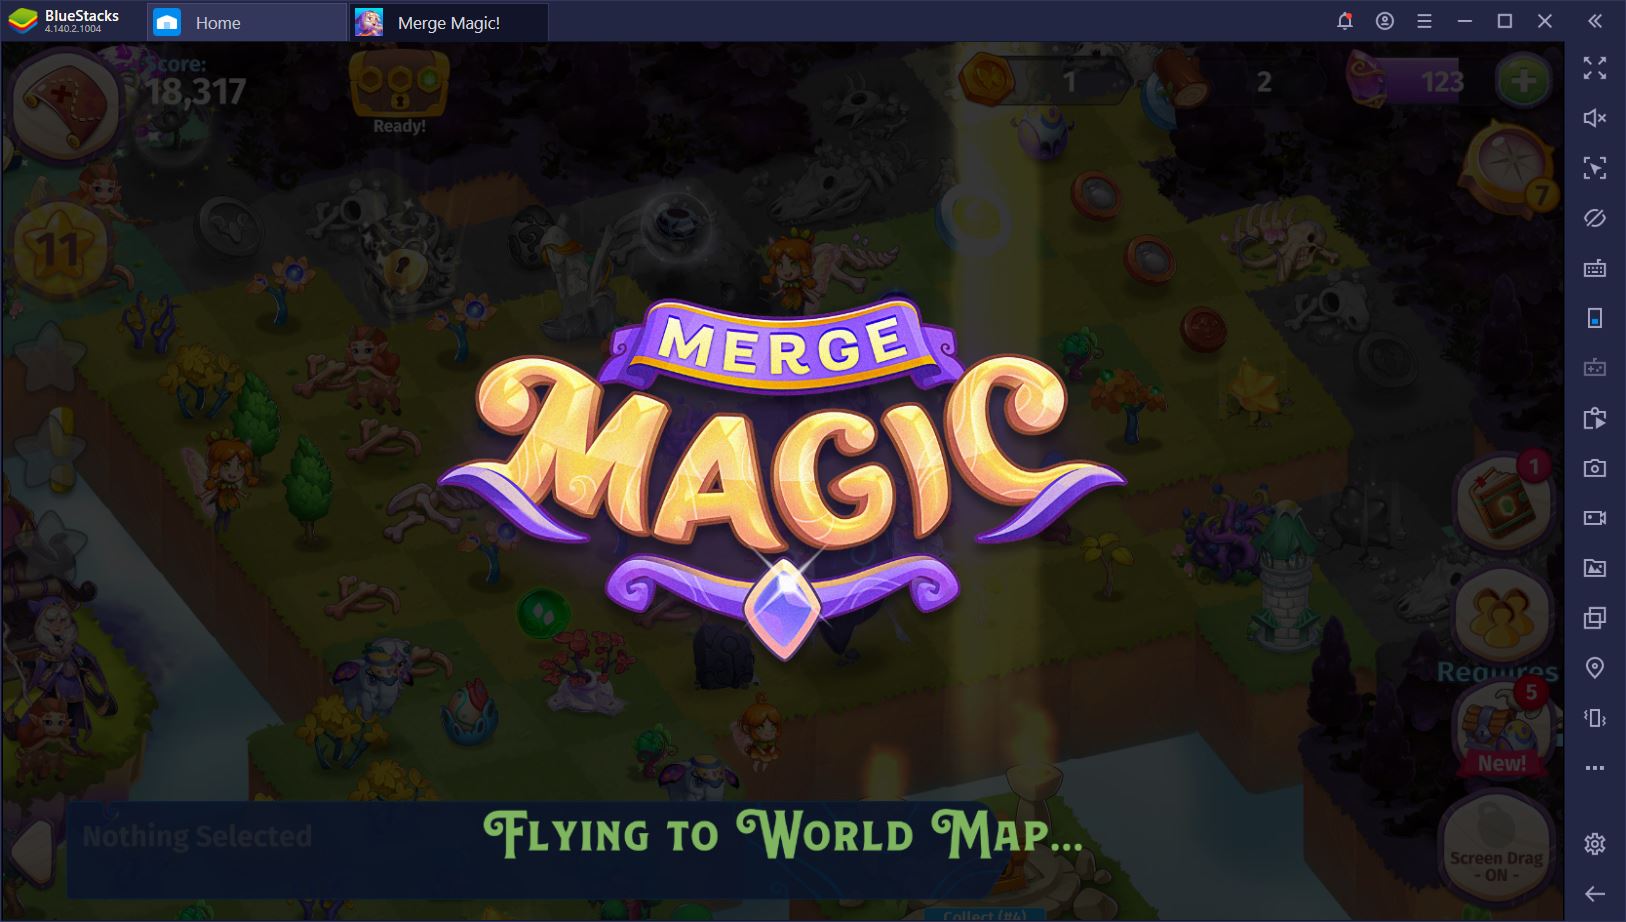 How to Play Merge Magic! on PC with BlueStacks